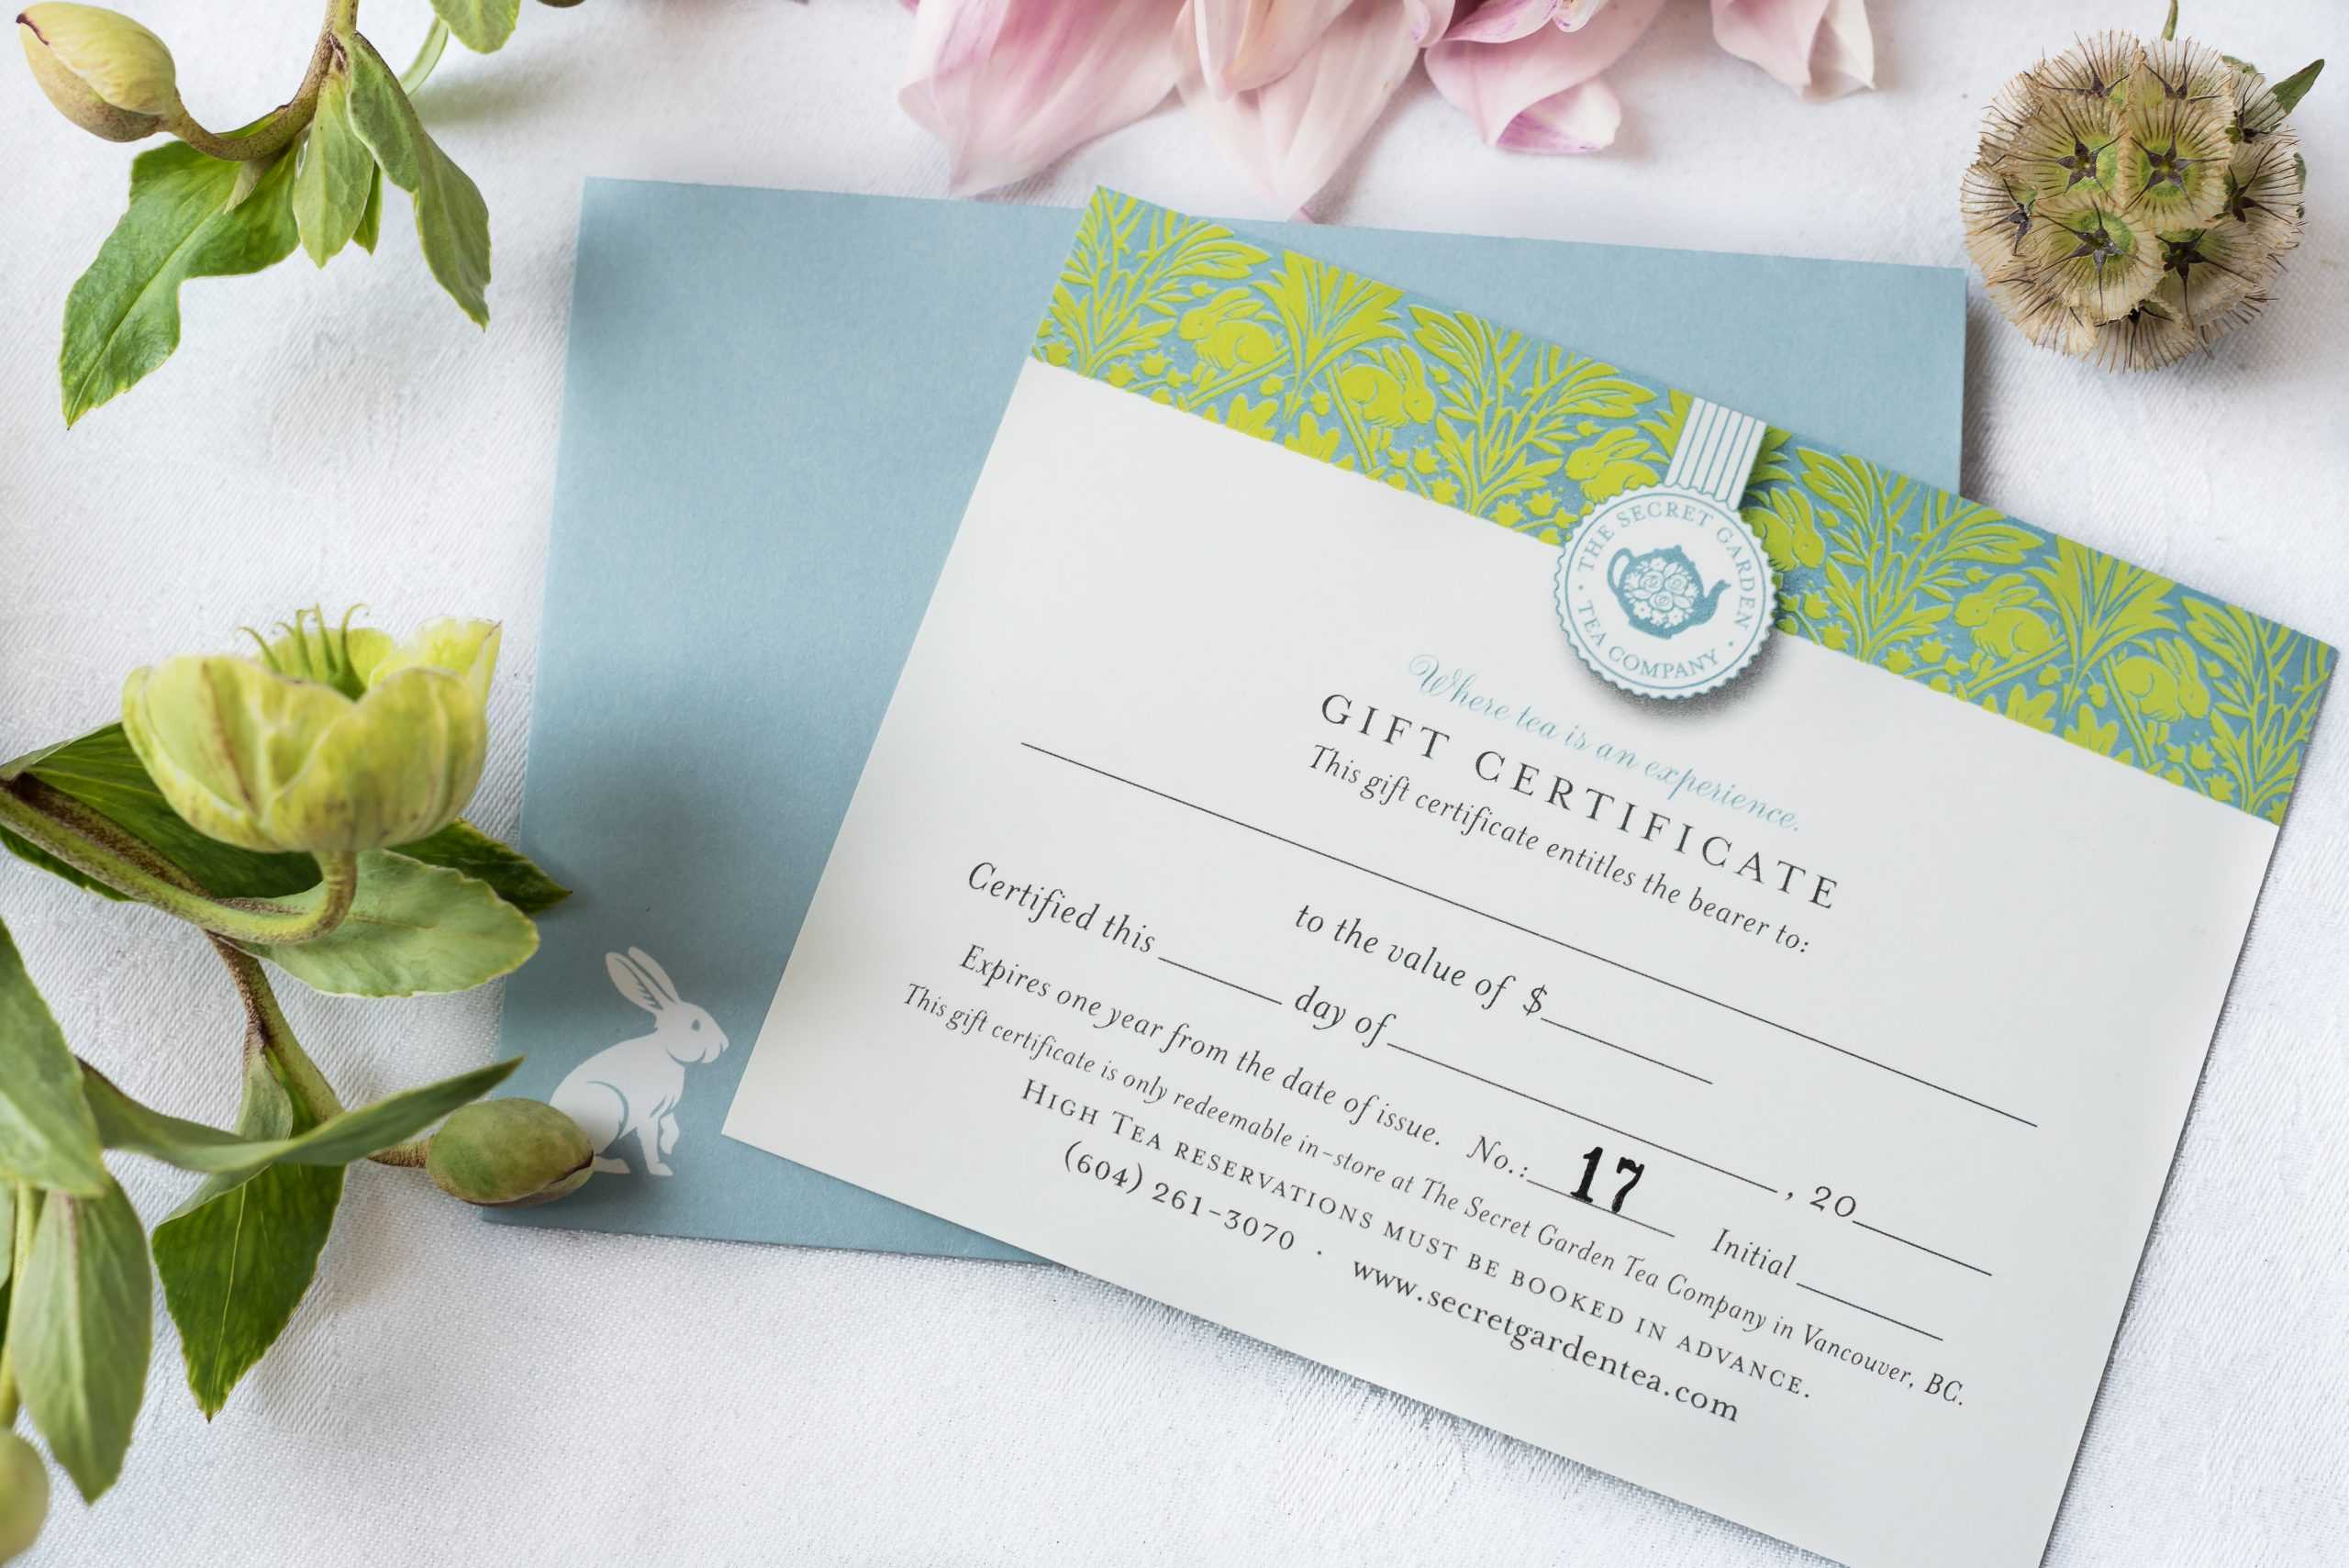 High Tea For Two Gift Certificate With This Entitles The Bearer To Template Certificate